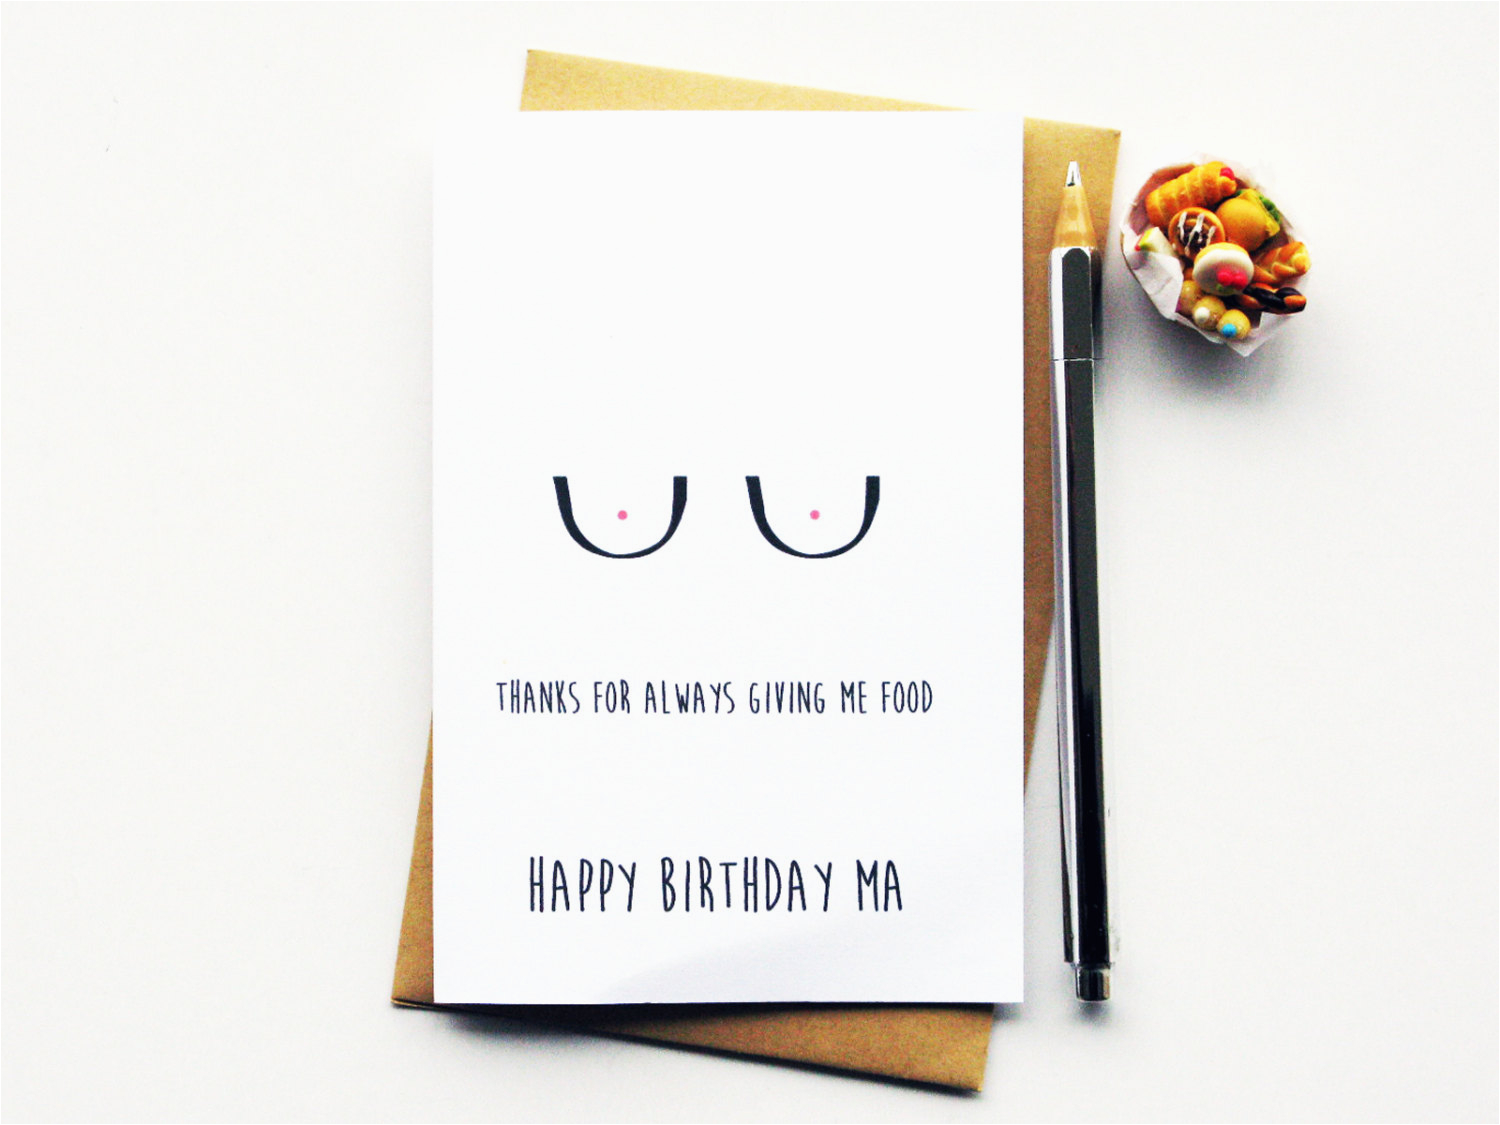 Funny Birthday Card Ideas For Your Mom - Printable Templates Free